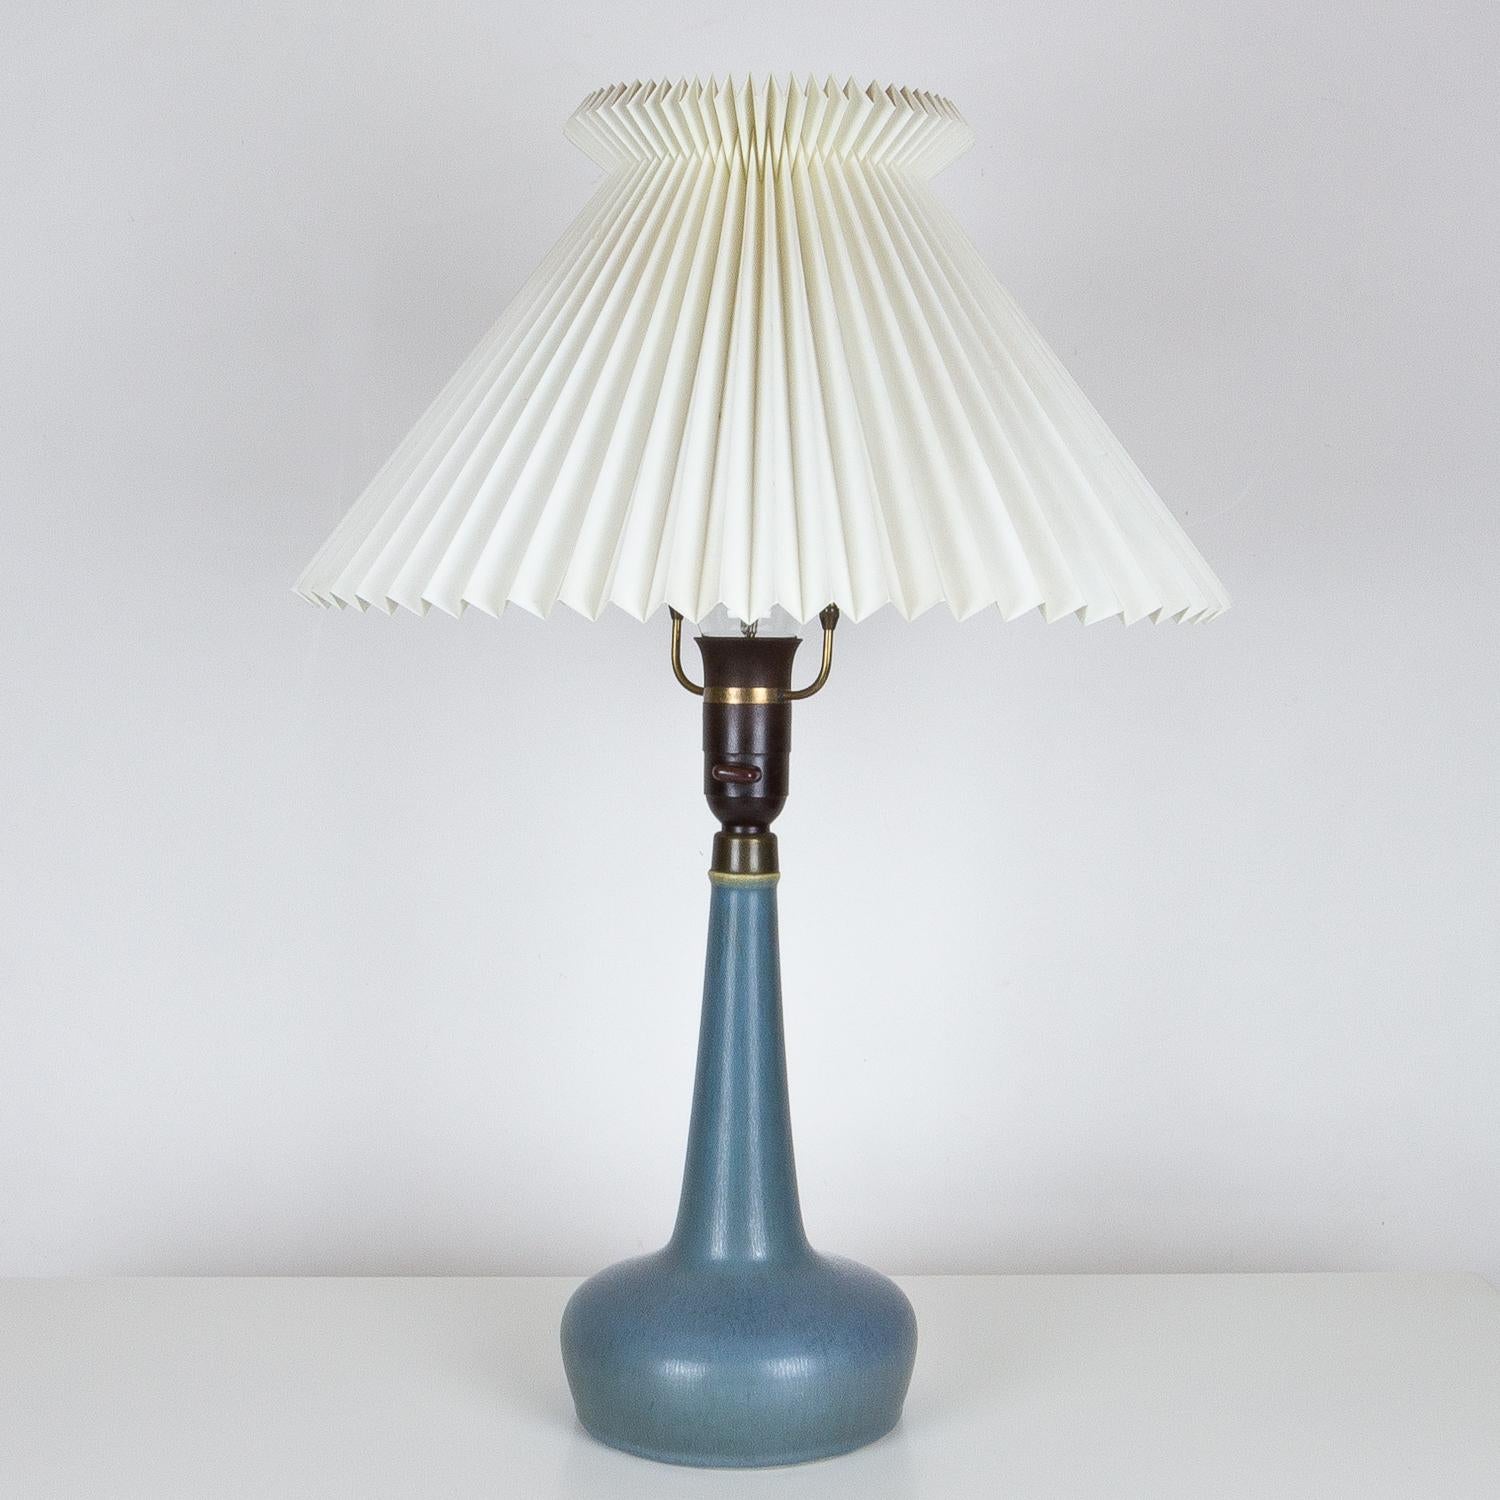 This 311 lamp was designed by Esben Klint in 1949 and produced by Danish ceramic company Palshus for Le Klint. The lamp is ceramic with original brass shade fittings and Le Klint shade. The Danish pottery Palshus was run by Annelise and Per